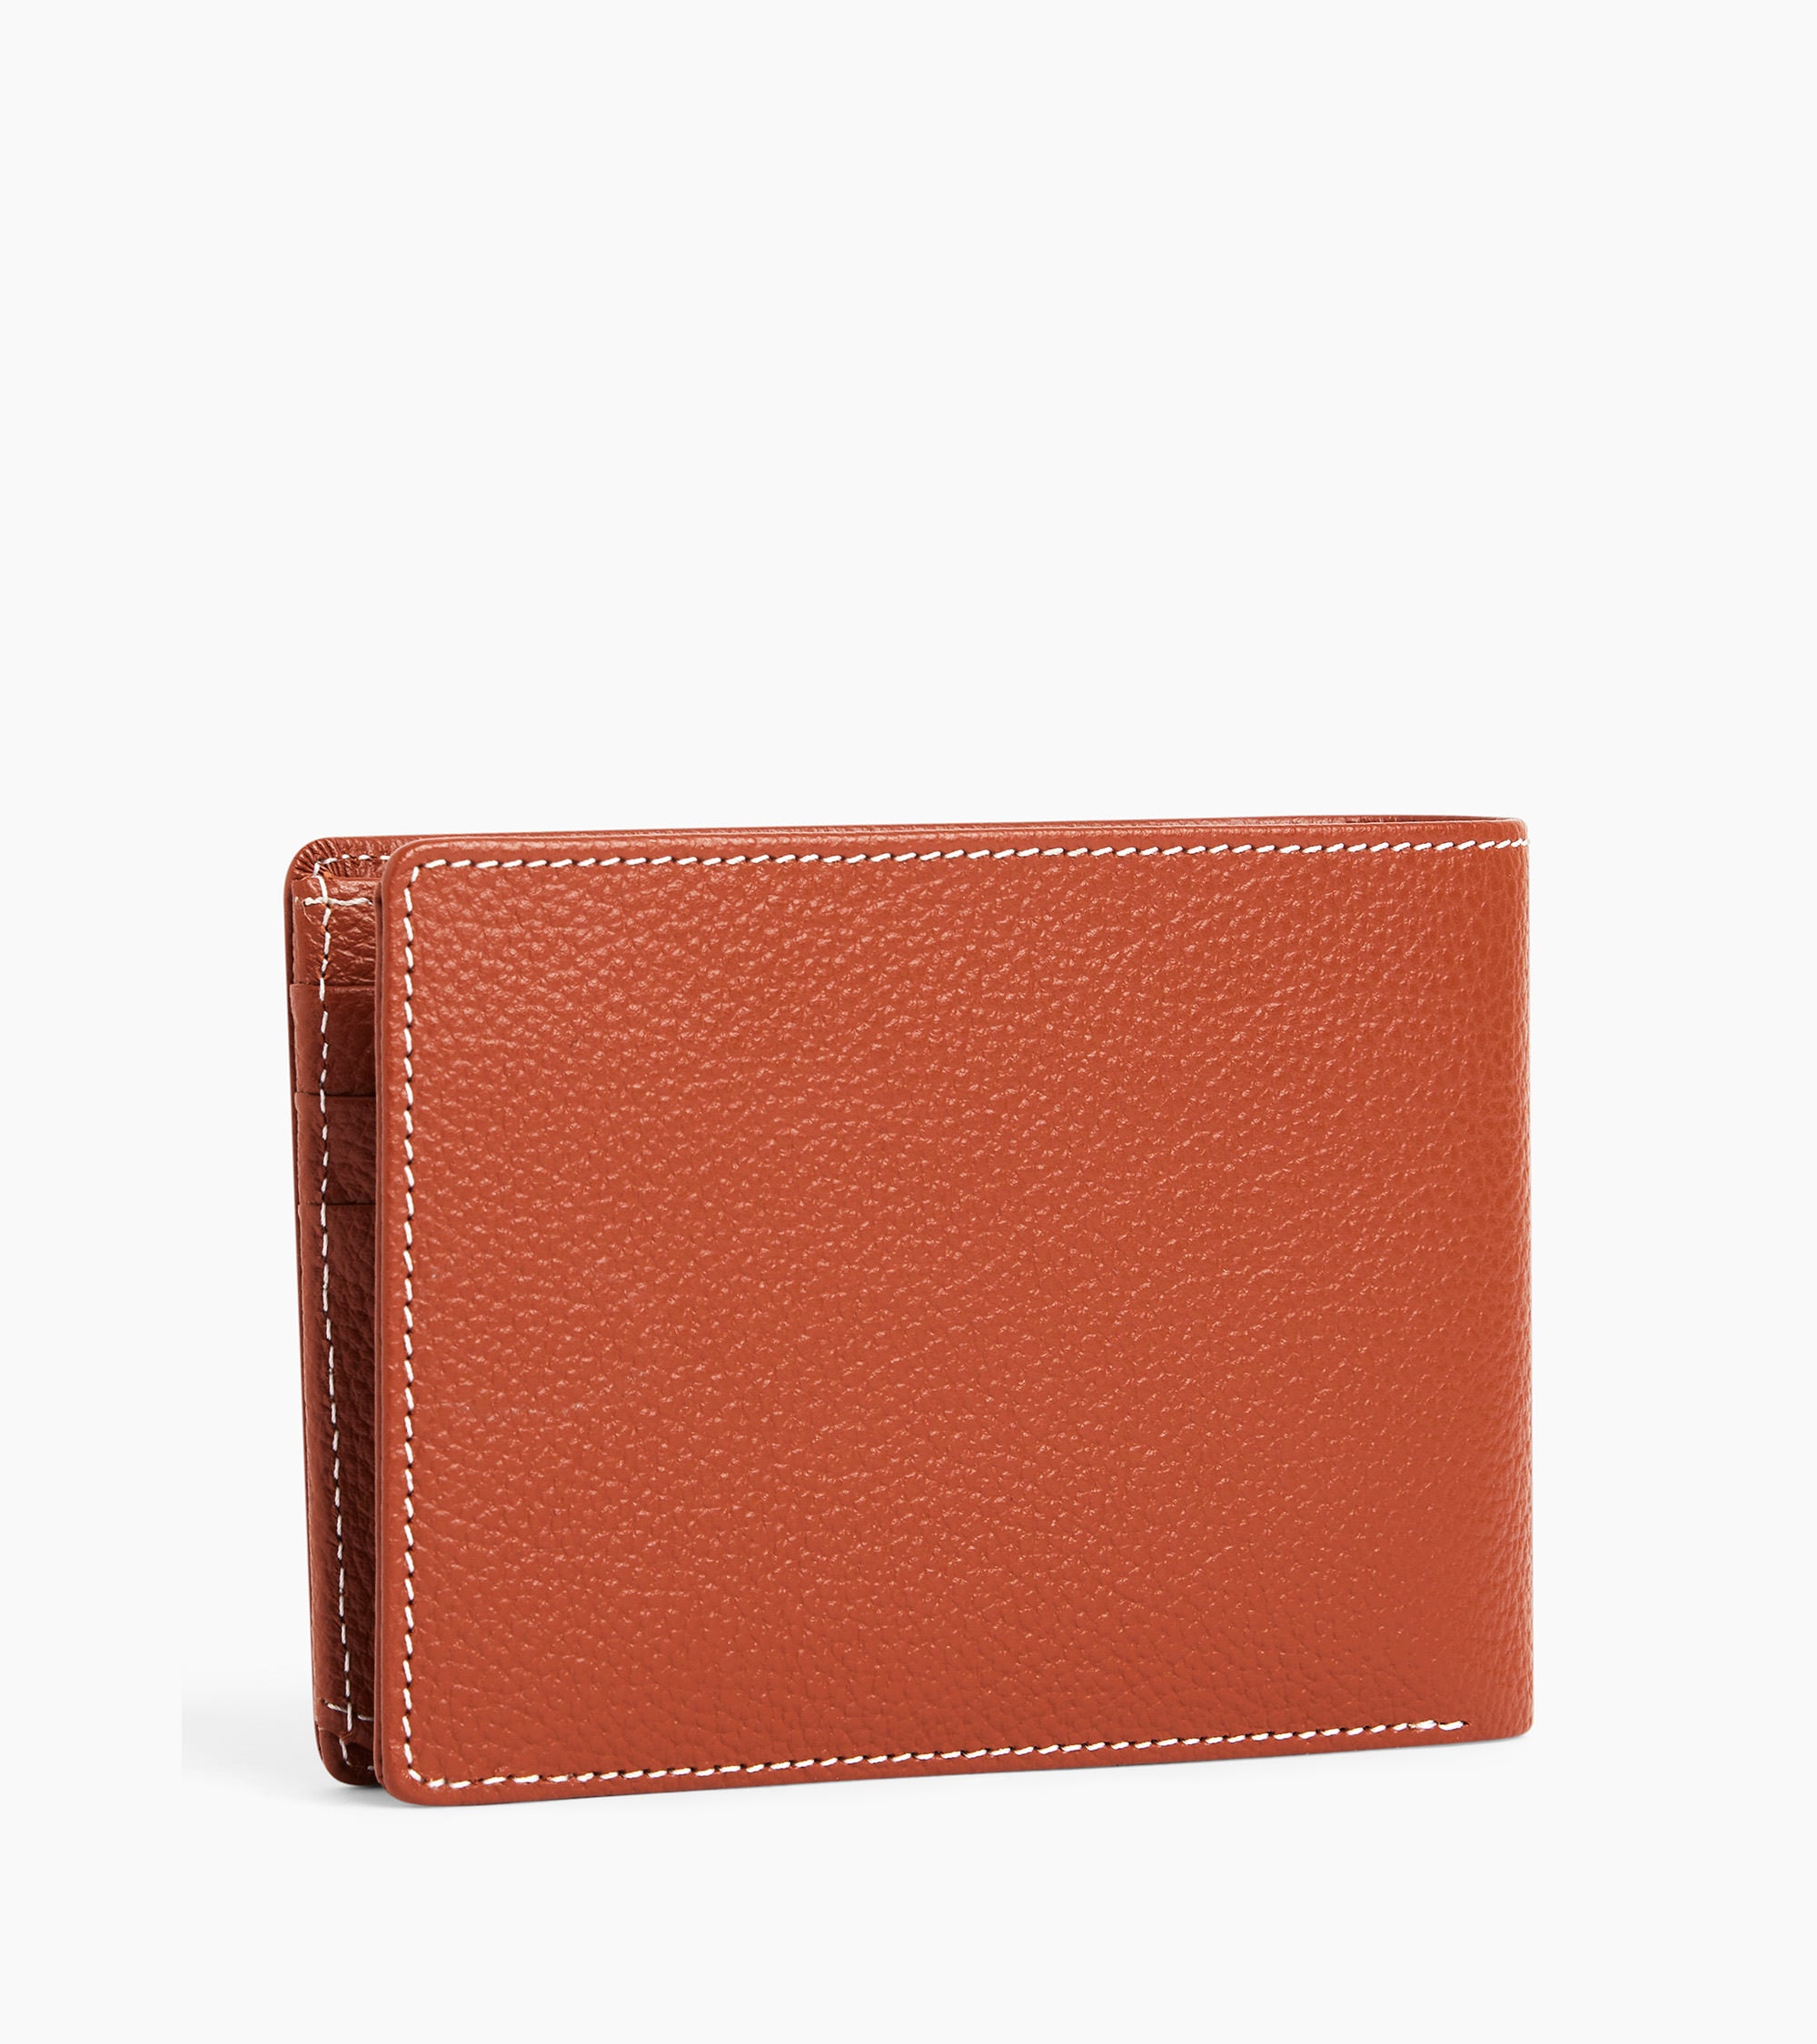 Emile flap wallet with 2 gussets in grained leather